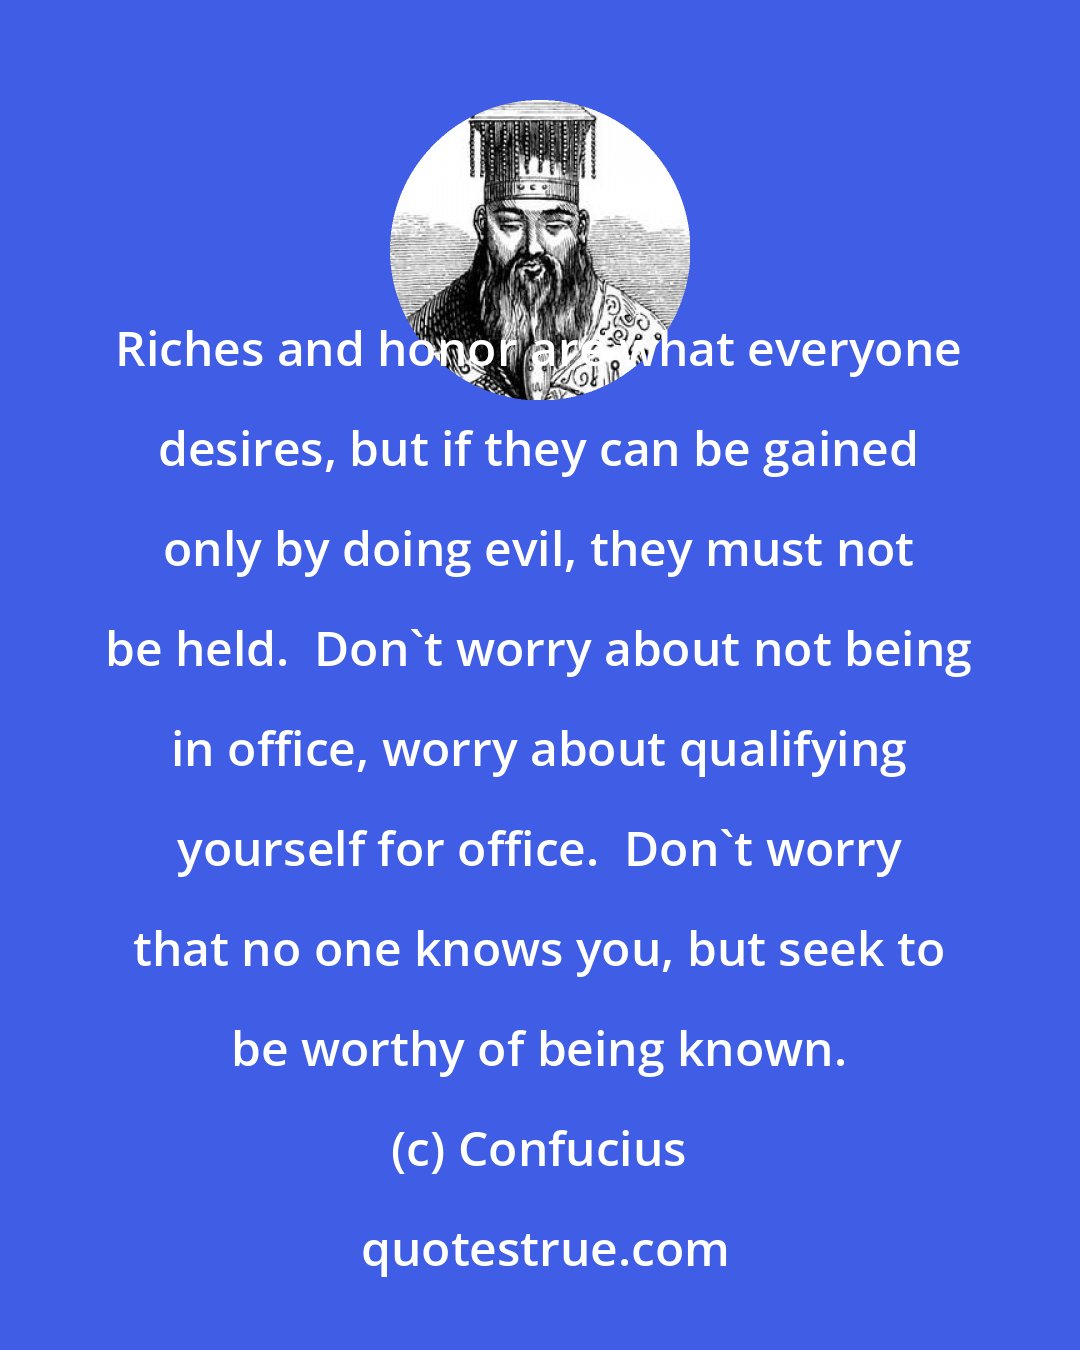 Confucius: Riches and honor are what everyone desires, but if they can be gained only by doing evil, they must not be held.  Don't worry about not being in office, worry about qualifying yourself for office.  Don't worry that no one knows you, but seek to be worthy of being known.